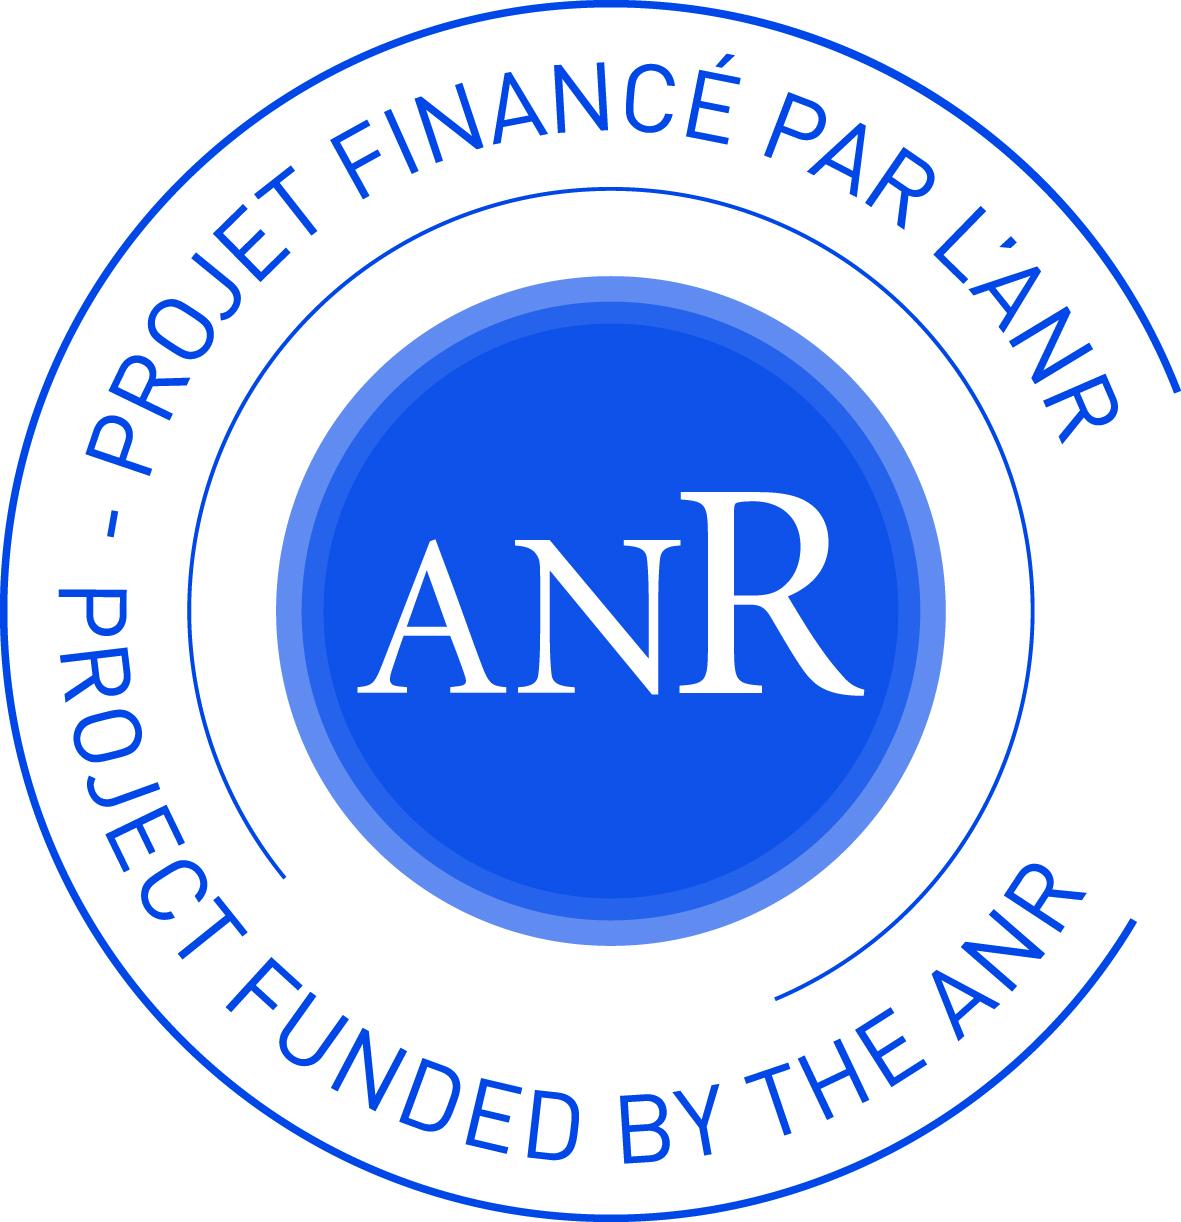 Founded by ANR